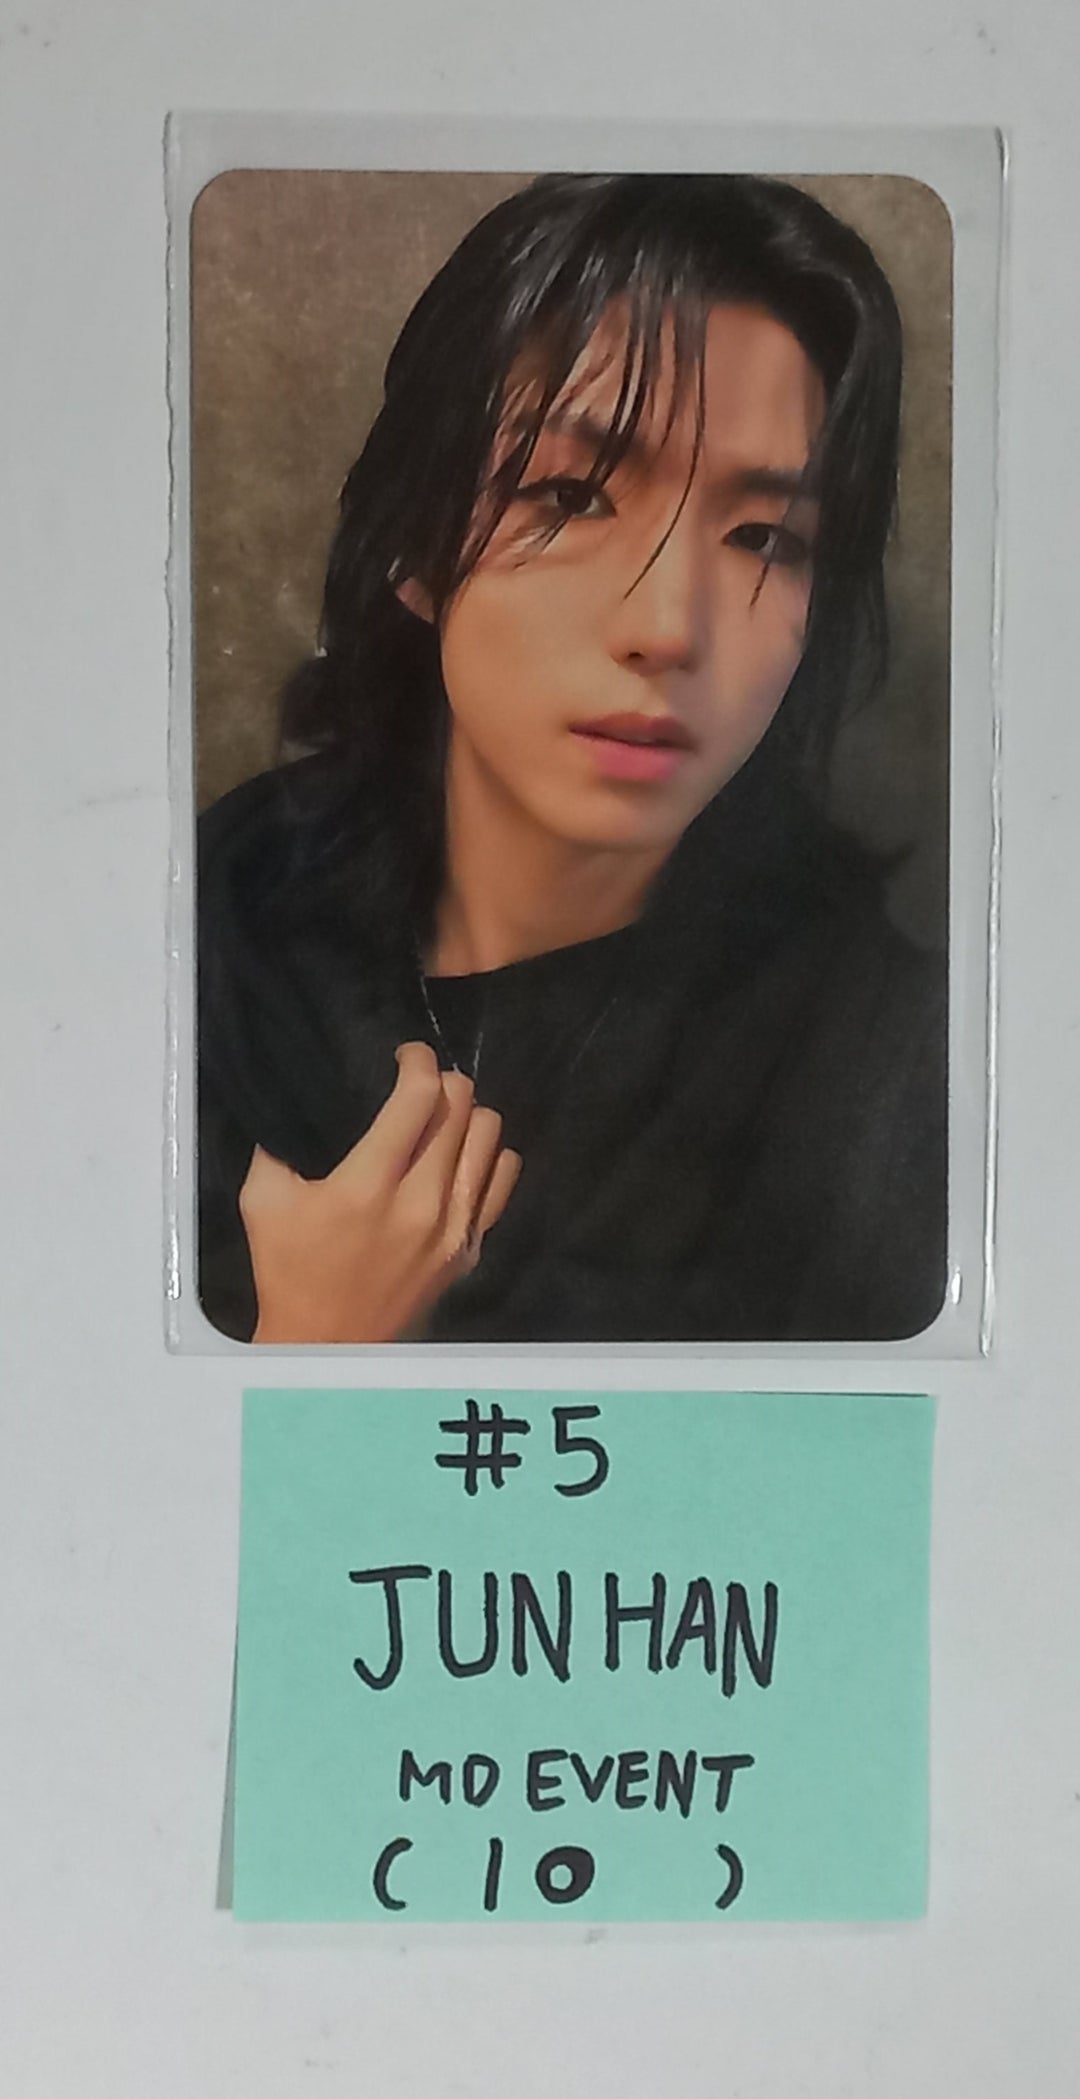 XDINARY HEROES "CLOSED bETA" - Official MD Event Photocard [24.4.19]